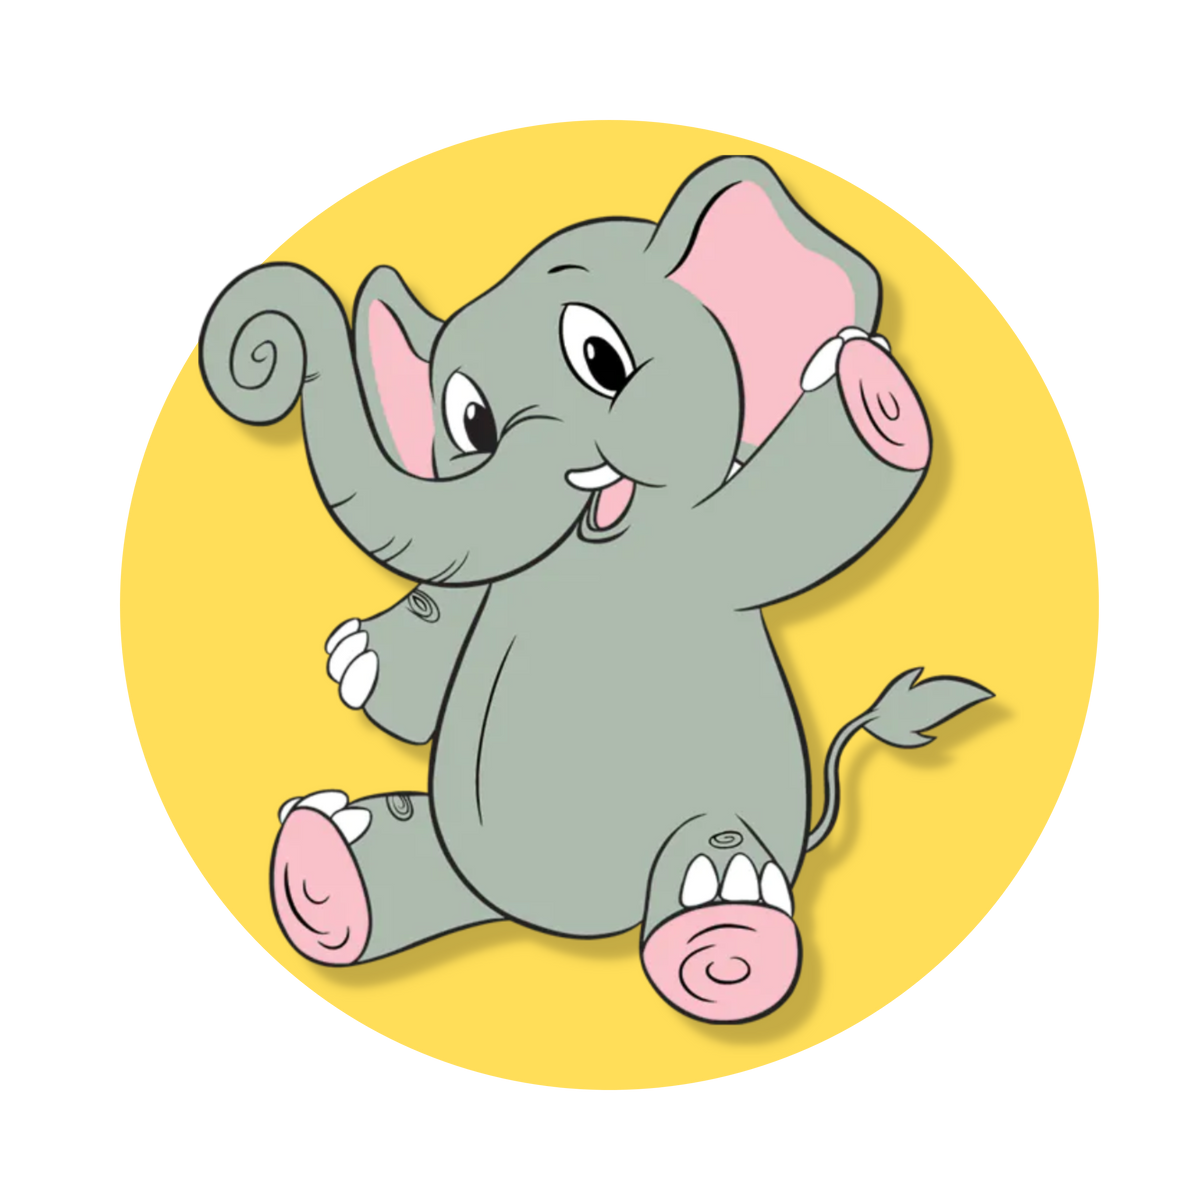 a charming illustration of a gray elephant sitting down with its legs spread out. It has large pink ears and a long trunk raised upwards, giving off a playful vibe with its smiling, open mouth. The background is a solid yellow circle, framing the elephant in a way that enhances its cheerful demeanor.